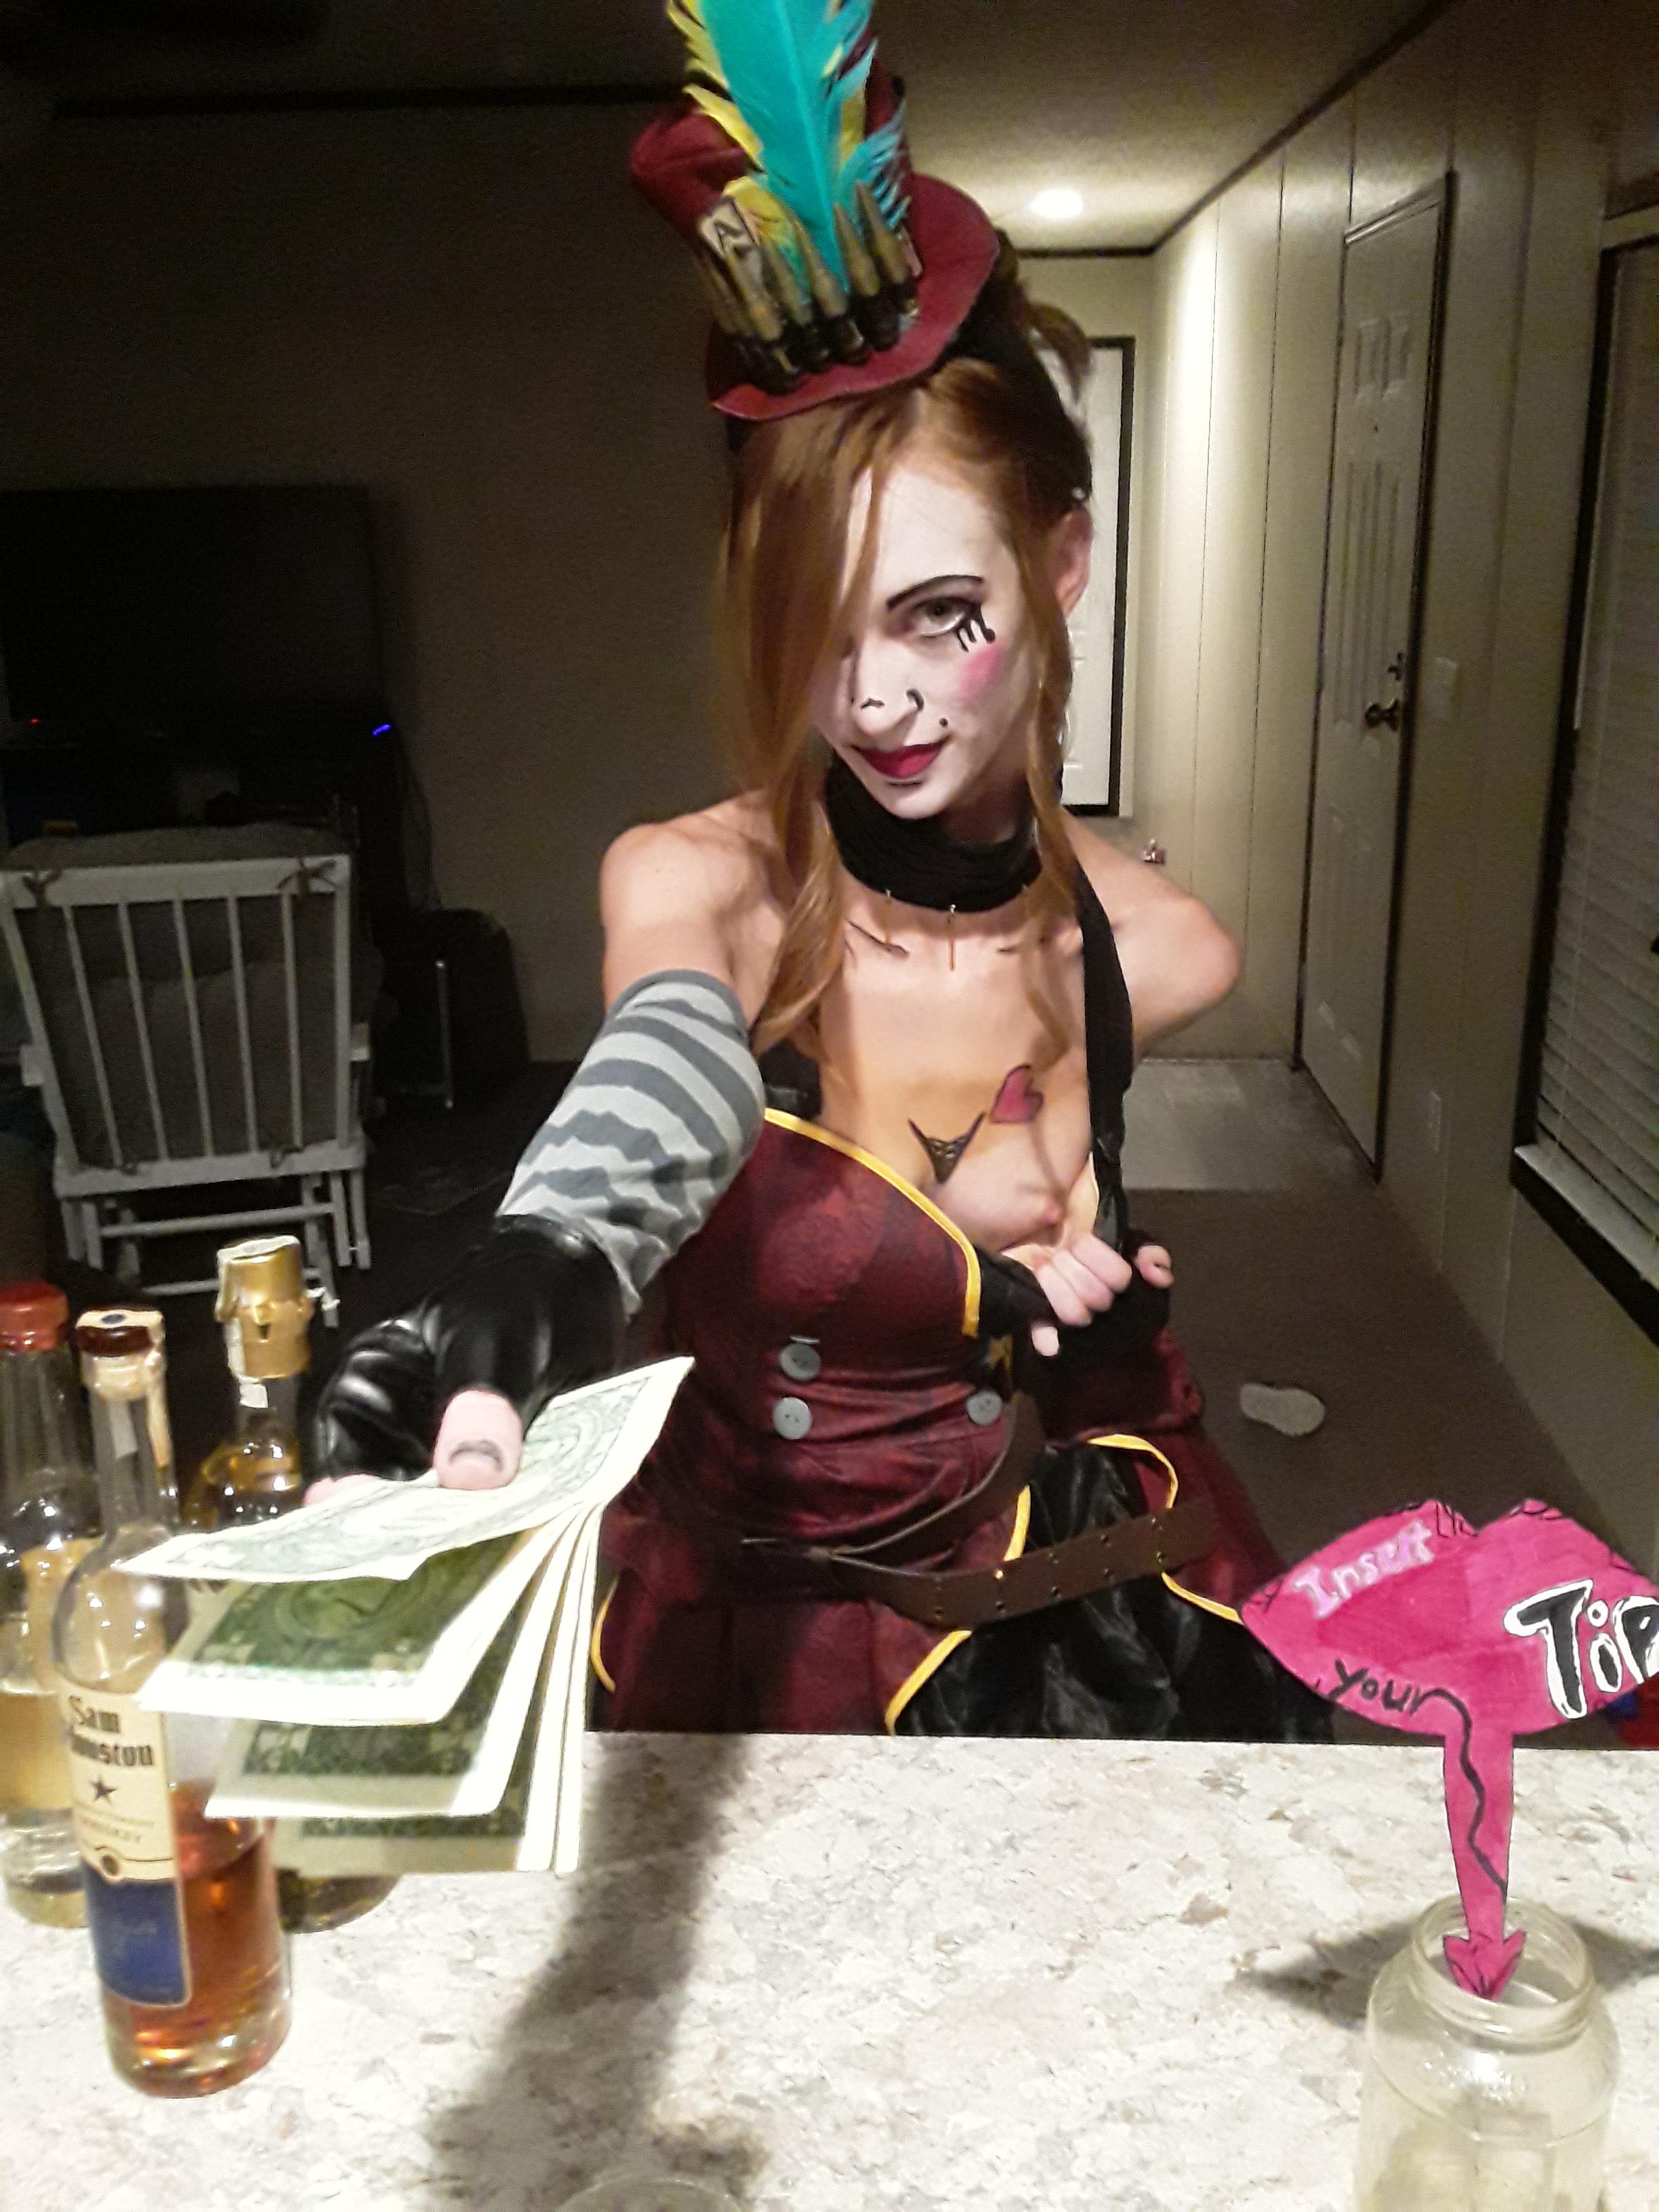 Wife tried a moxie cosplay awhile back